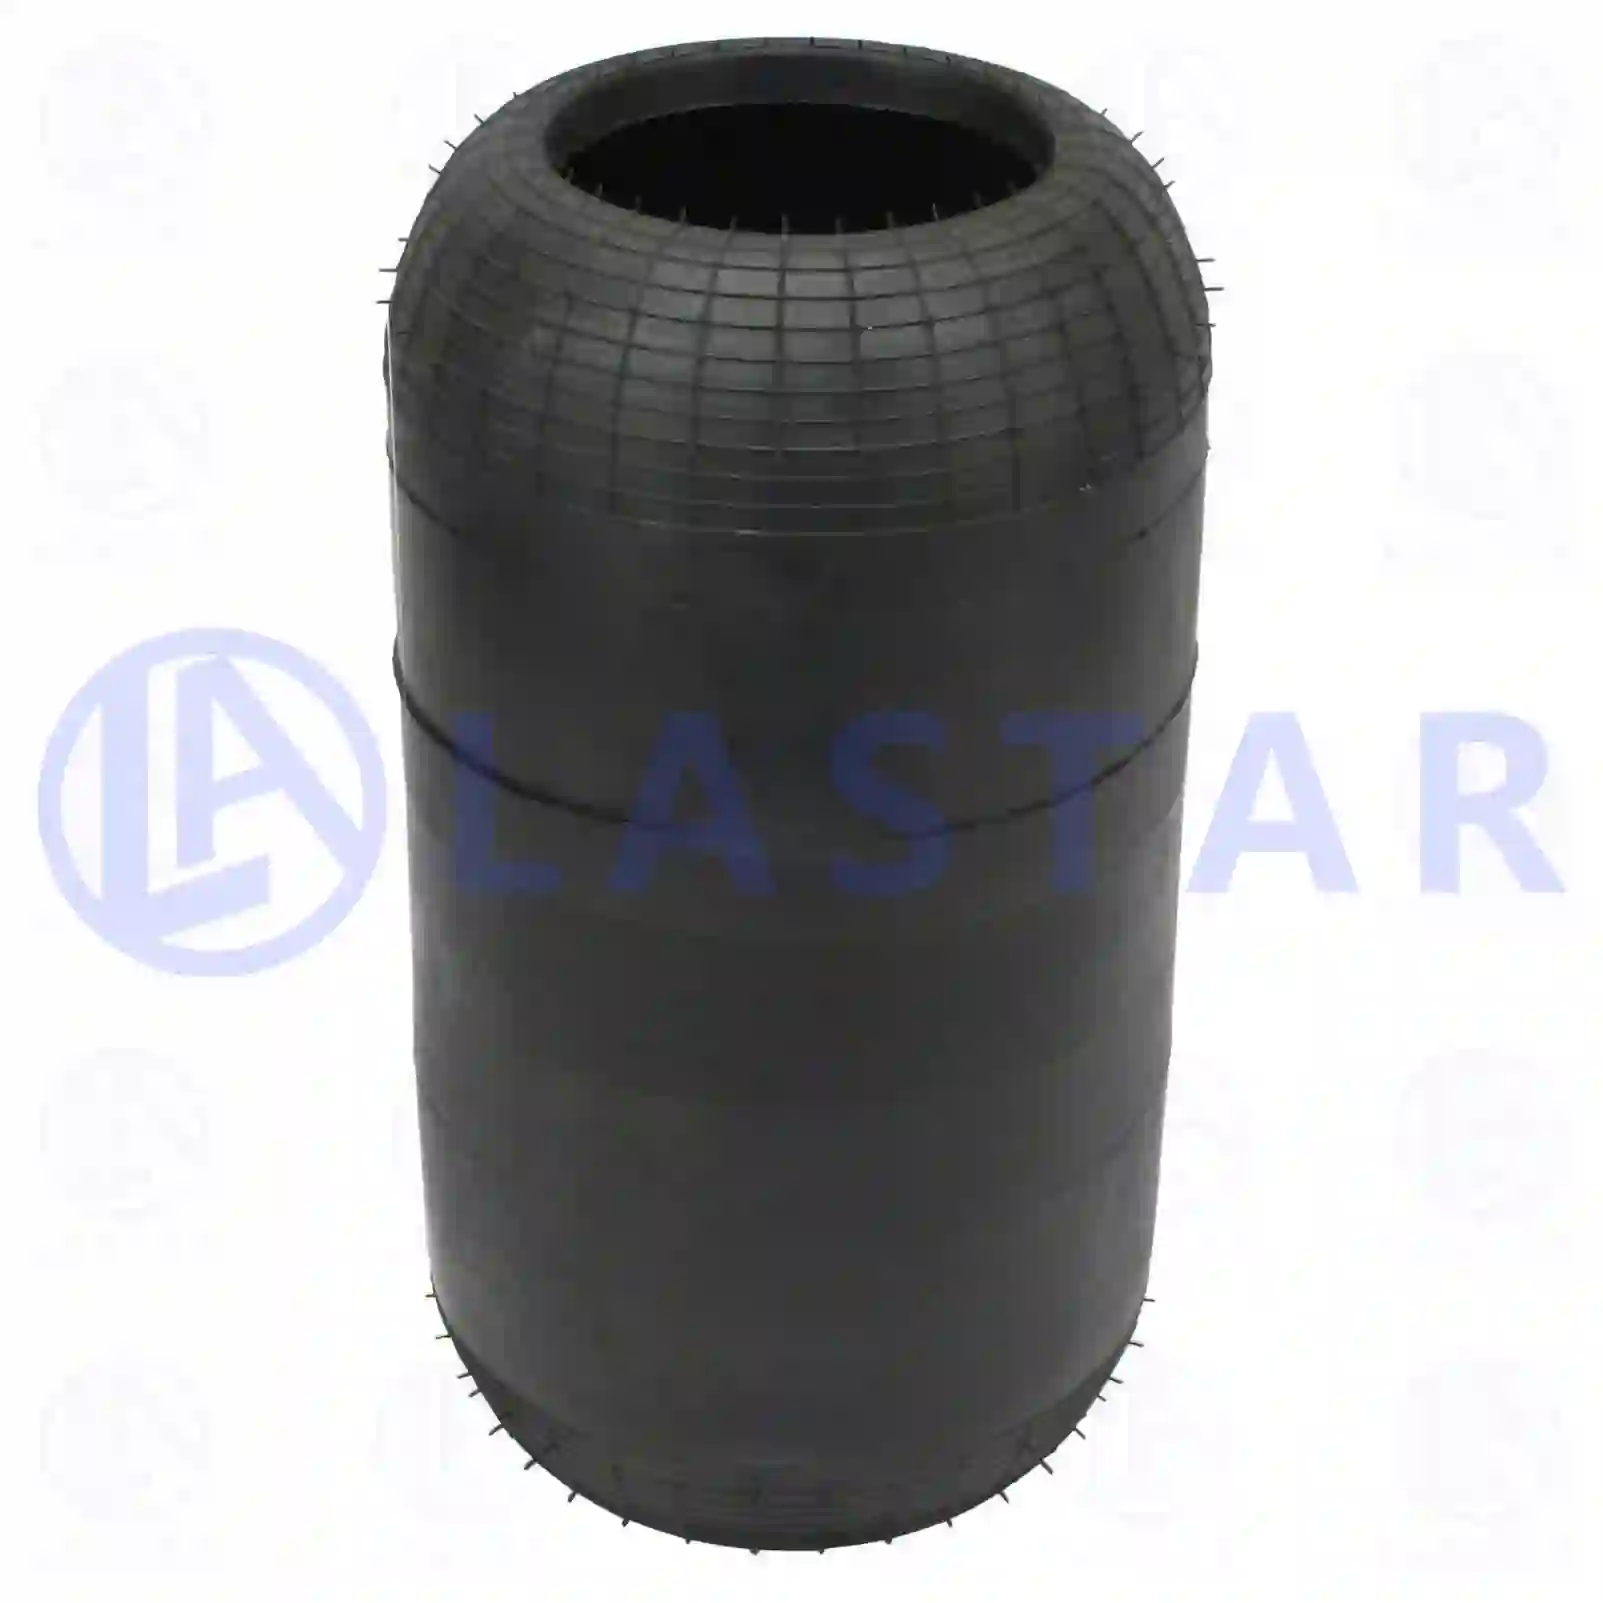 Air spring, without piston, 77728498, 0638148, 1322717, 638148, 0196043, 196043, 196043, 700196043, 81436010056, 81436010057, 81436010058, 81436010076, 81436010079, 81436010082, 81436010084, 81436010091, 81436010114, 81436010116, 81436010118, 3073280001, 3073280101, MLF7003, 1134446, 1135446 ||  77728498 Lastar Spare Part | Truck Spare Parts, Auotomotive Spare Parts Air spring, without piston, 77728498, 0638148, 1322717, 638148, 0196043, 196043, 196043, 700196043, 81436010056, 81436010057, 81436010058, 81436010076, 81436010079, 81436010082, 81436010084, 81436010091, 81436010114, 81436010116, 81436010118, 3073280001, 3073280101, MLF7003, 1134446, 1135446 ||  77728498 Lastar Spare Part | Truck Spare Parts, Auotomotive Spare Parts